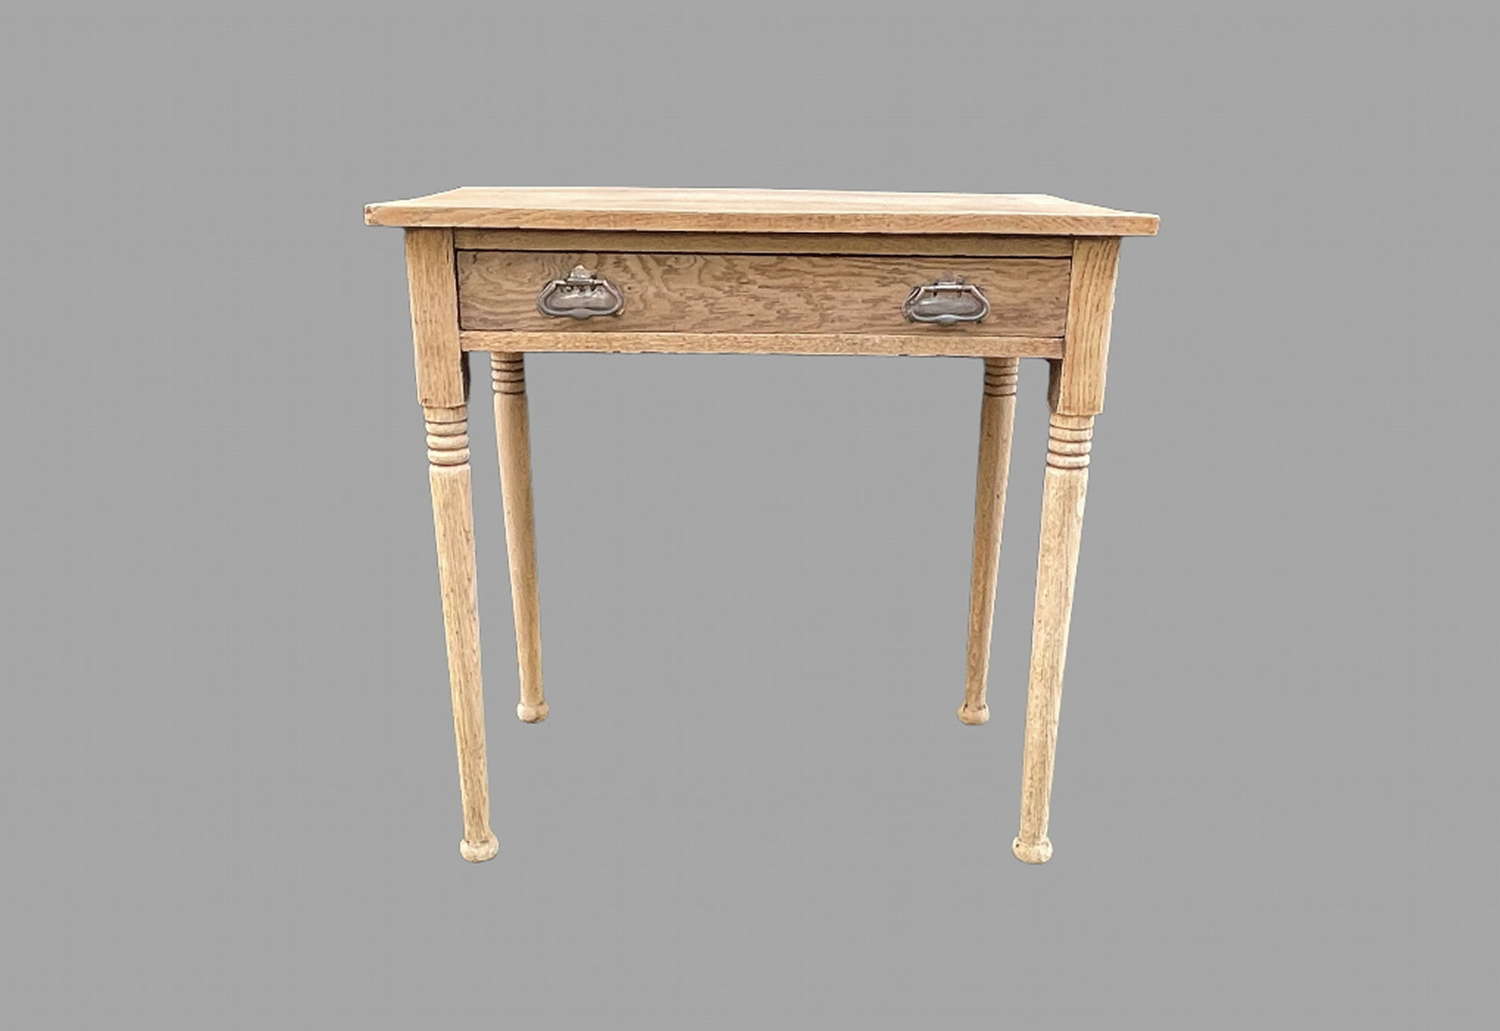 A Lovely Oak 19thc Side Table with drawer